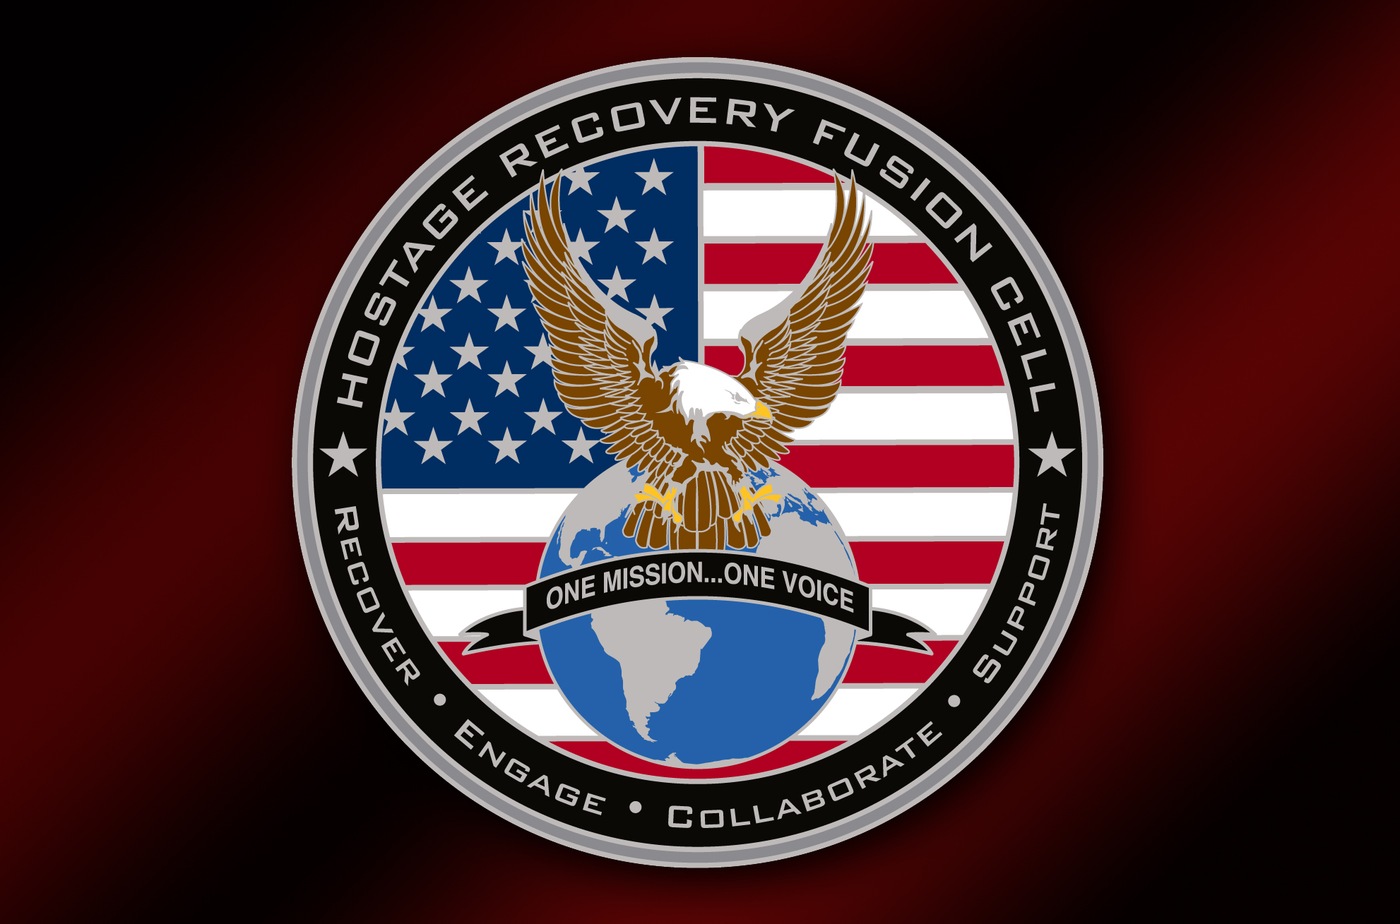 Hostage Recovery Fusion Cell seal with images of globe, bald eagle, and American flag; text includes Recover, Engage, Collaborate, Support, One Mission…One Voice.